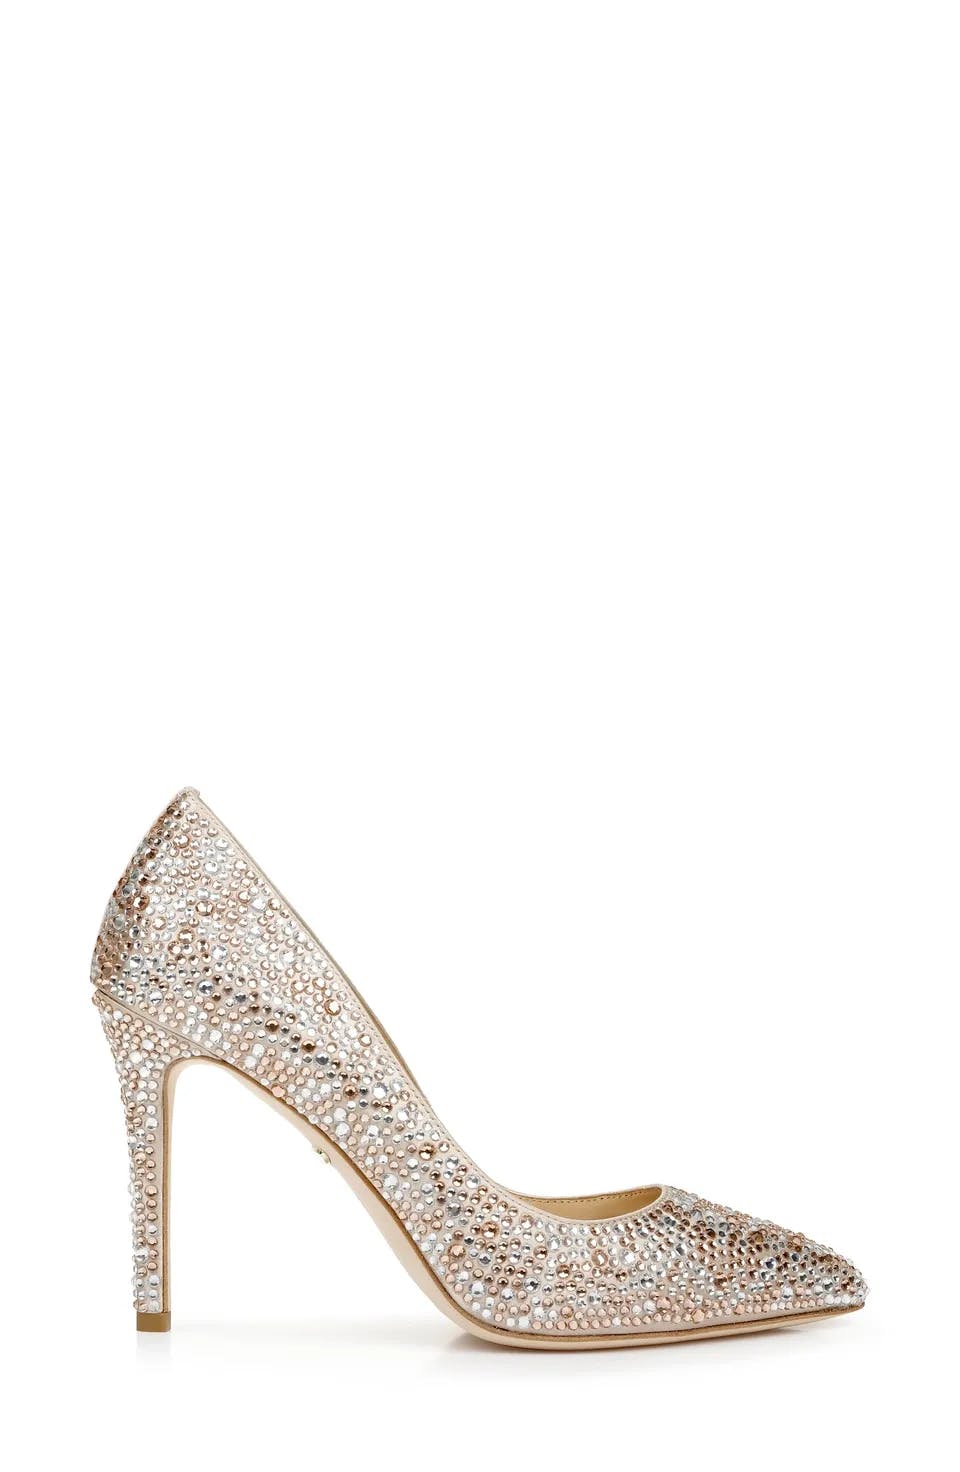 A silver high-heeled pump adorned with sparkling crystals, featuring a pointed toe and a sleek design, against a plain white background.